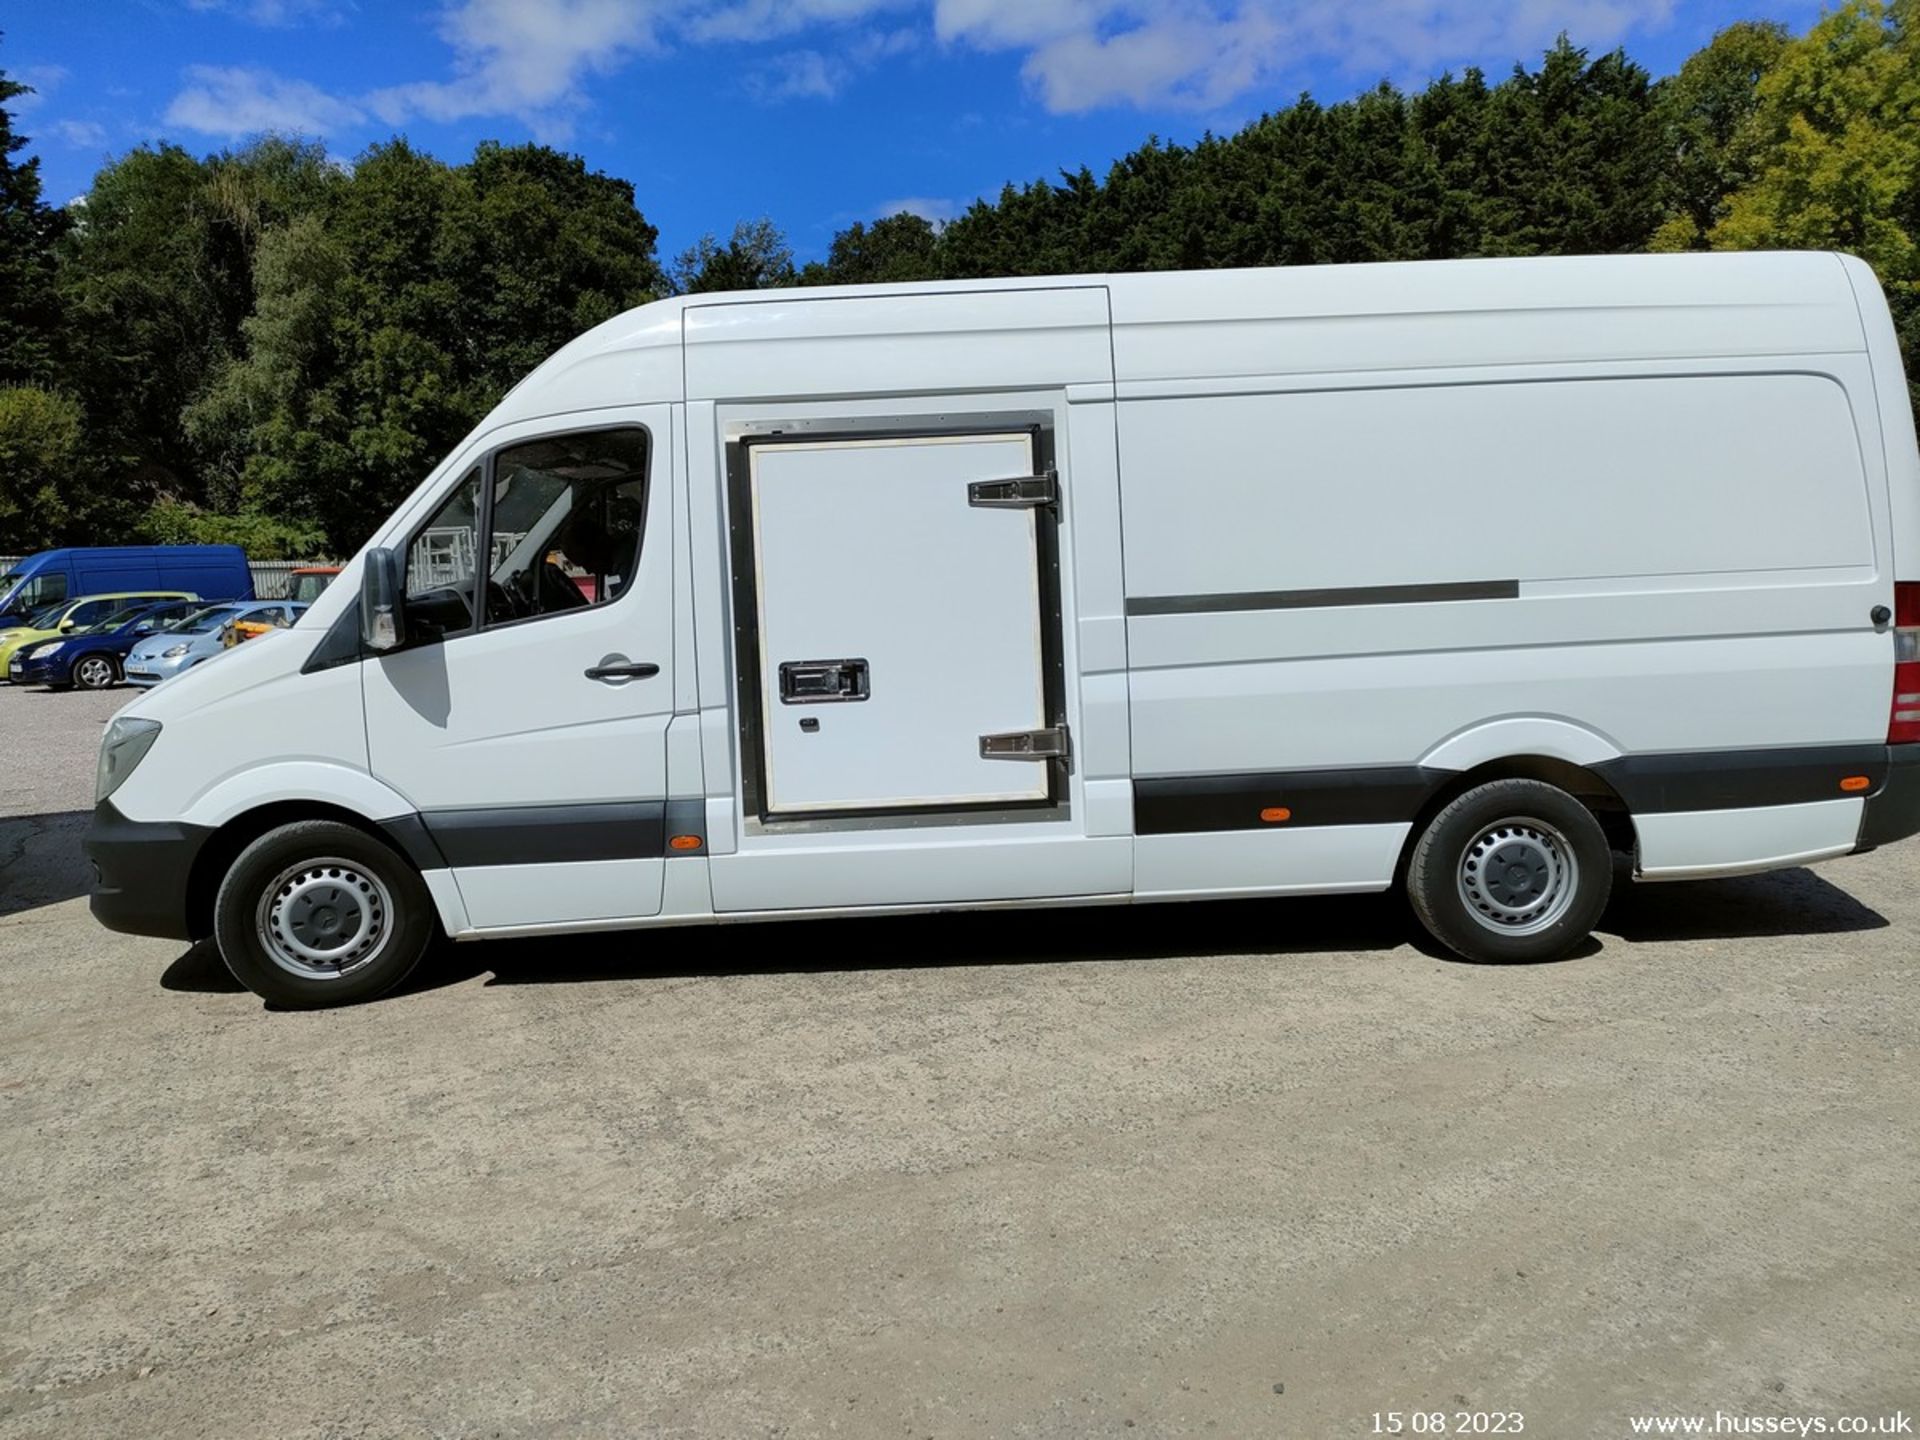 18/68 MERCEDES-BENZ SPRINTER 314CDI - 2143cc 5dr Refrigerated (White) - Image 3 of 40